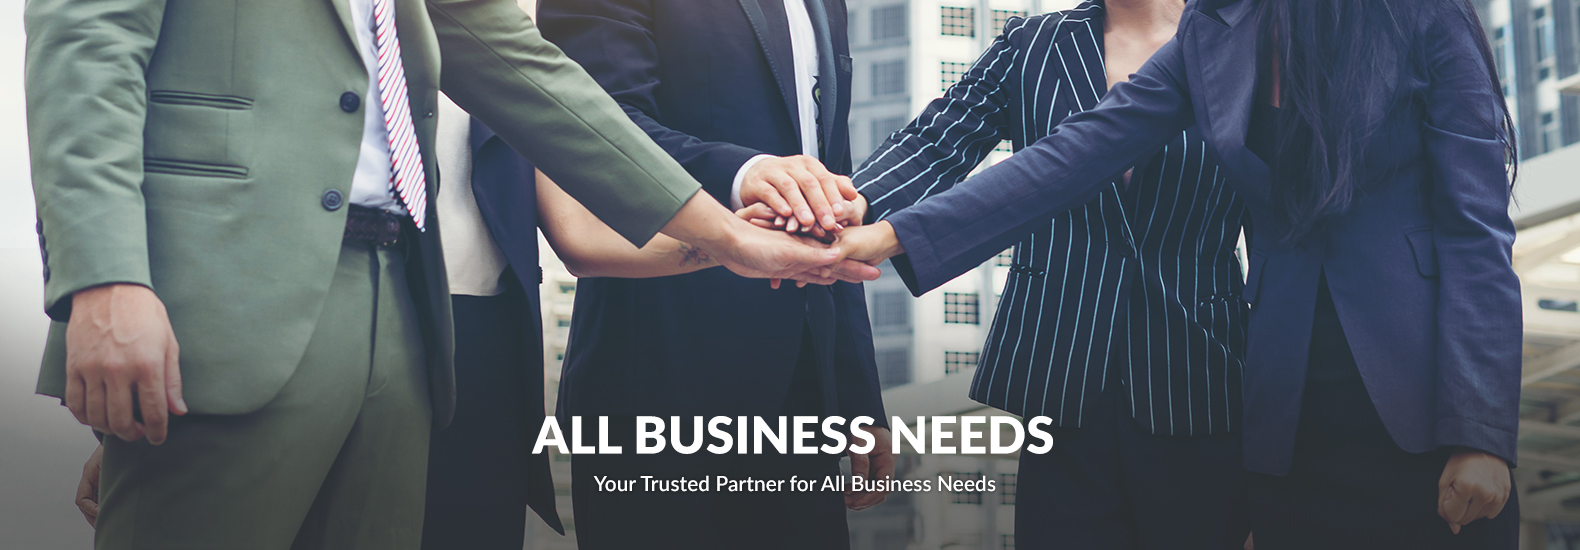 your trusted partner for all business needs